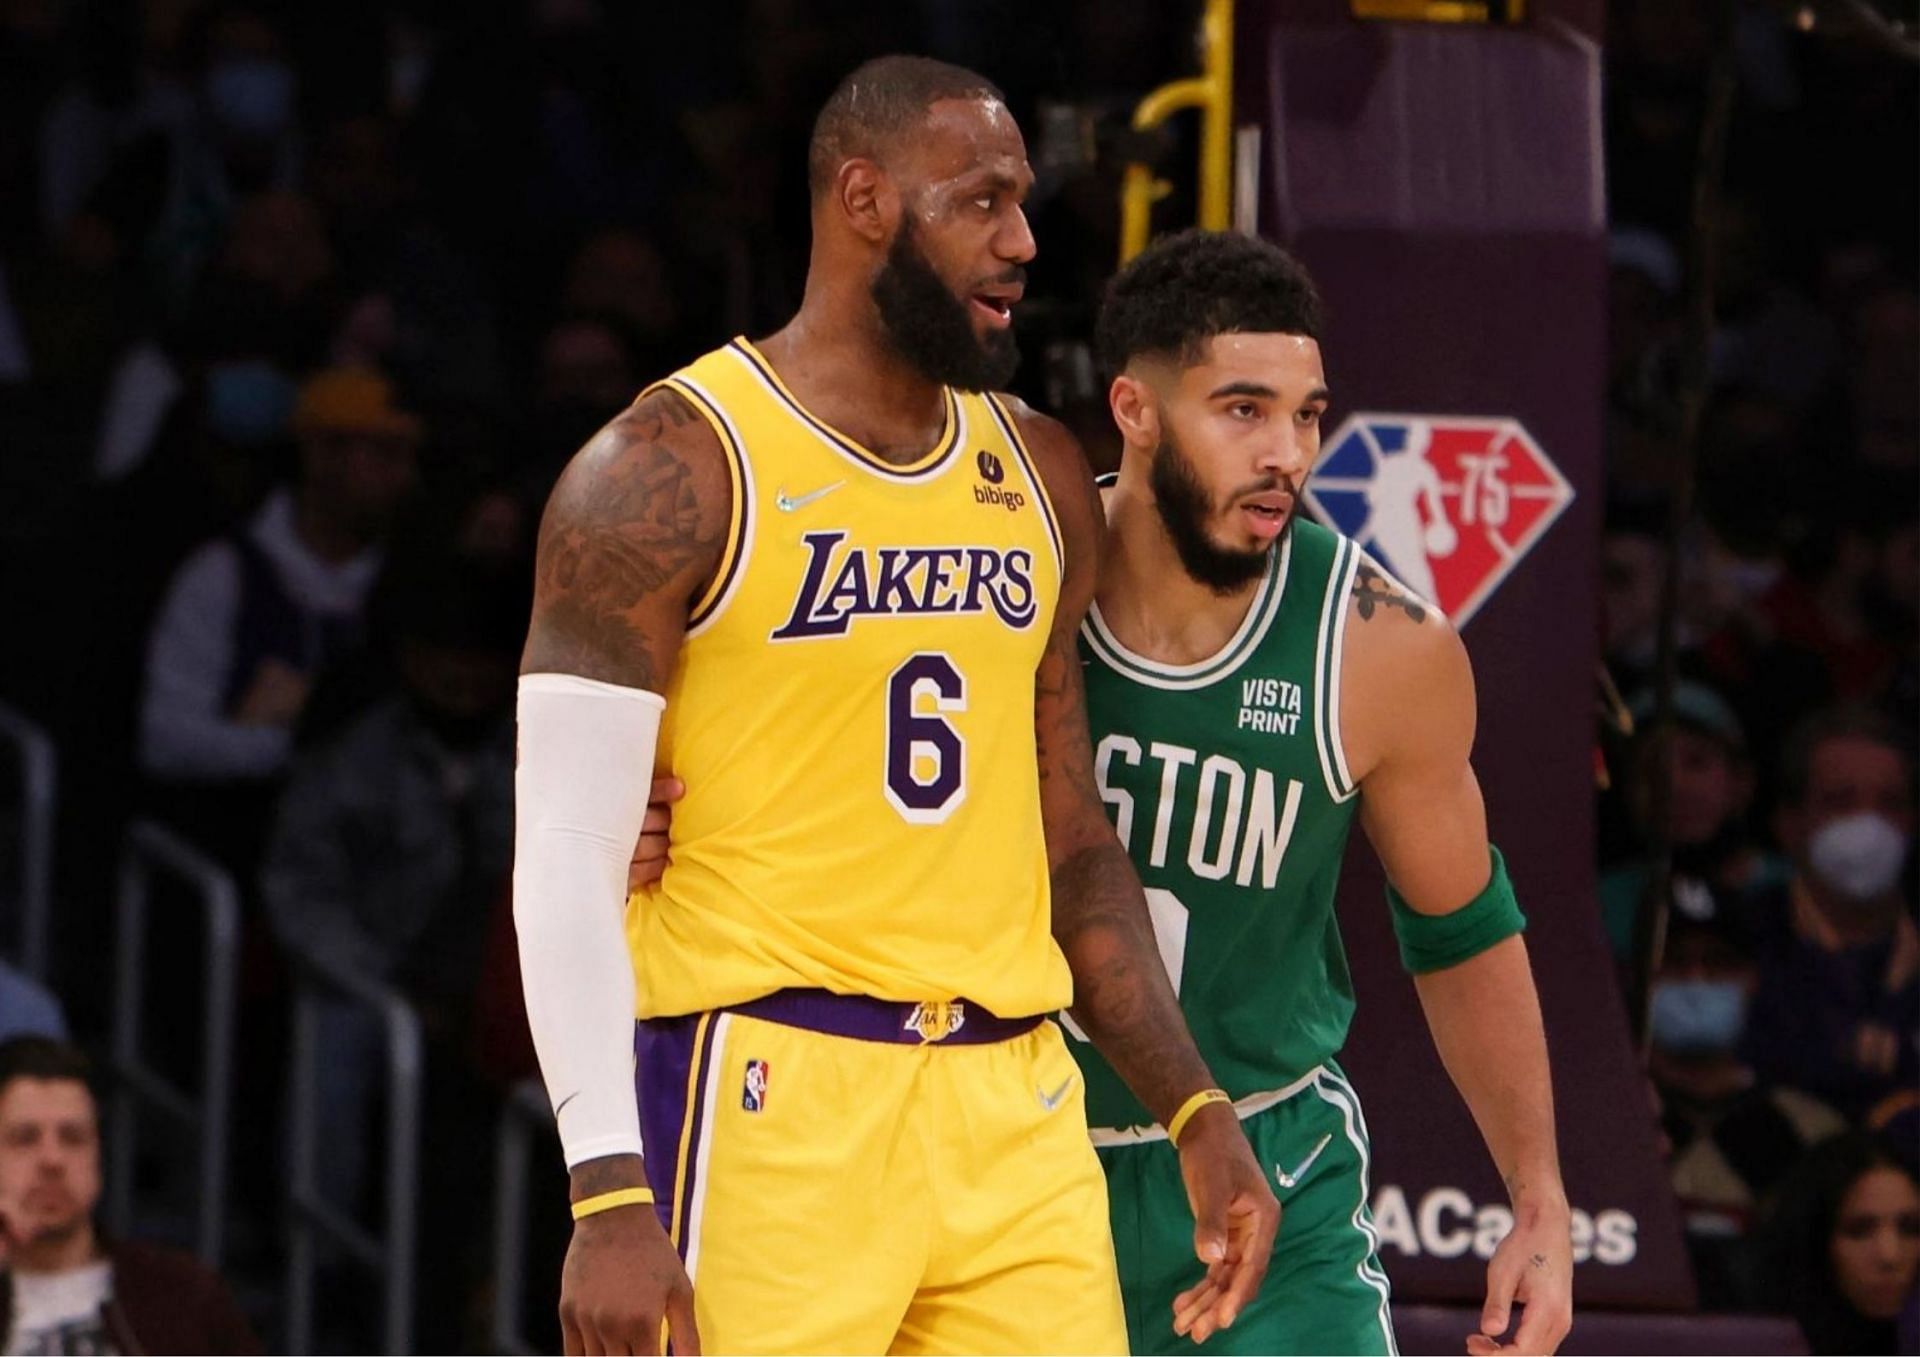 Nothing comes close in the NBA to the rivalry between the Boston Celtics and LA Lakers. [photo: Sporting News]